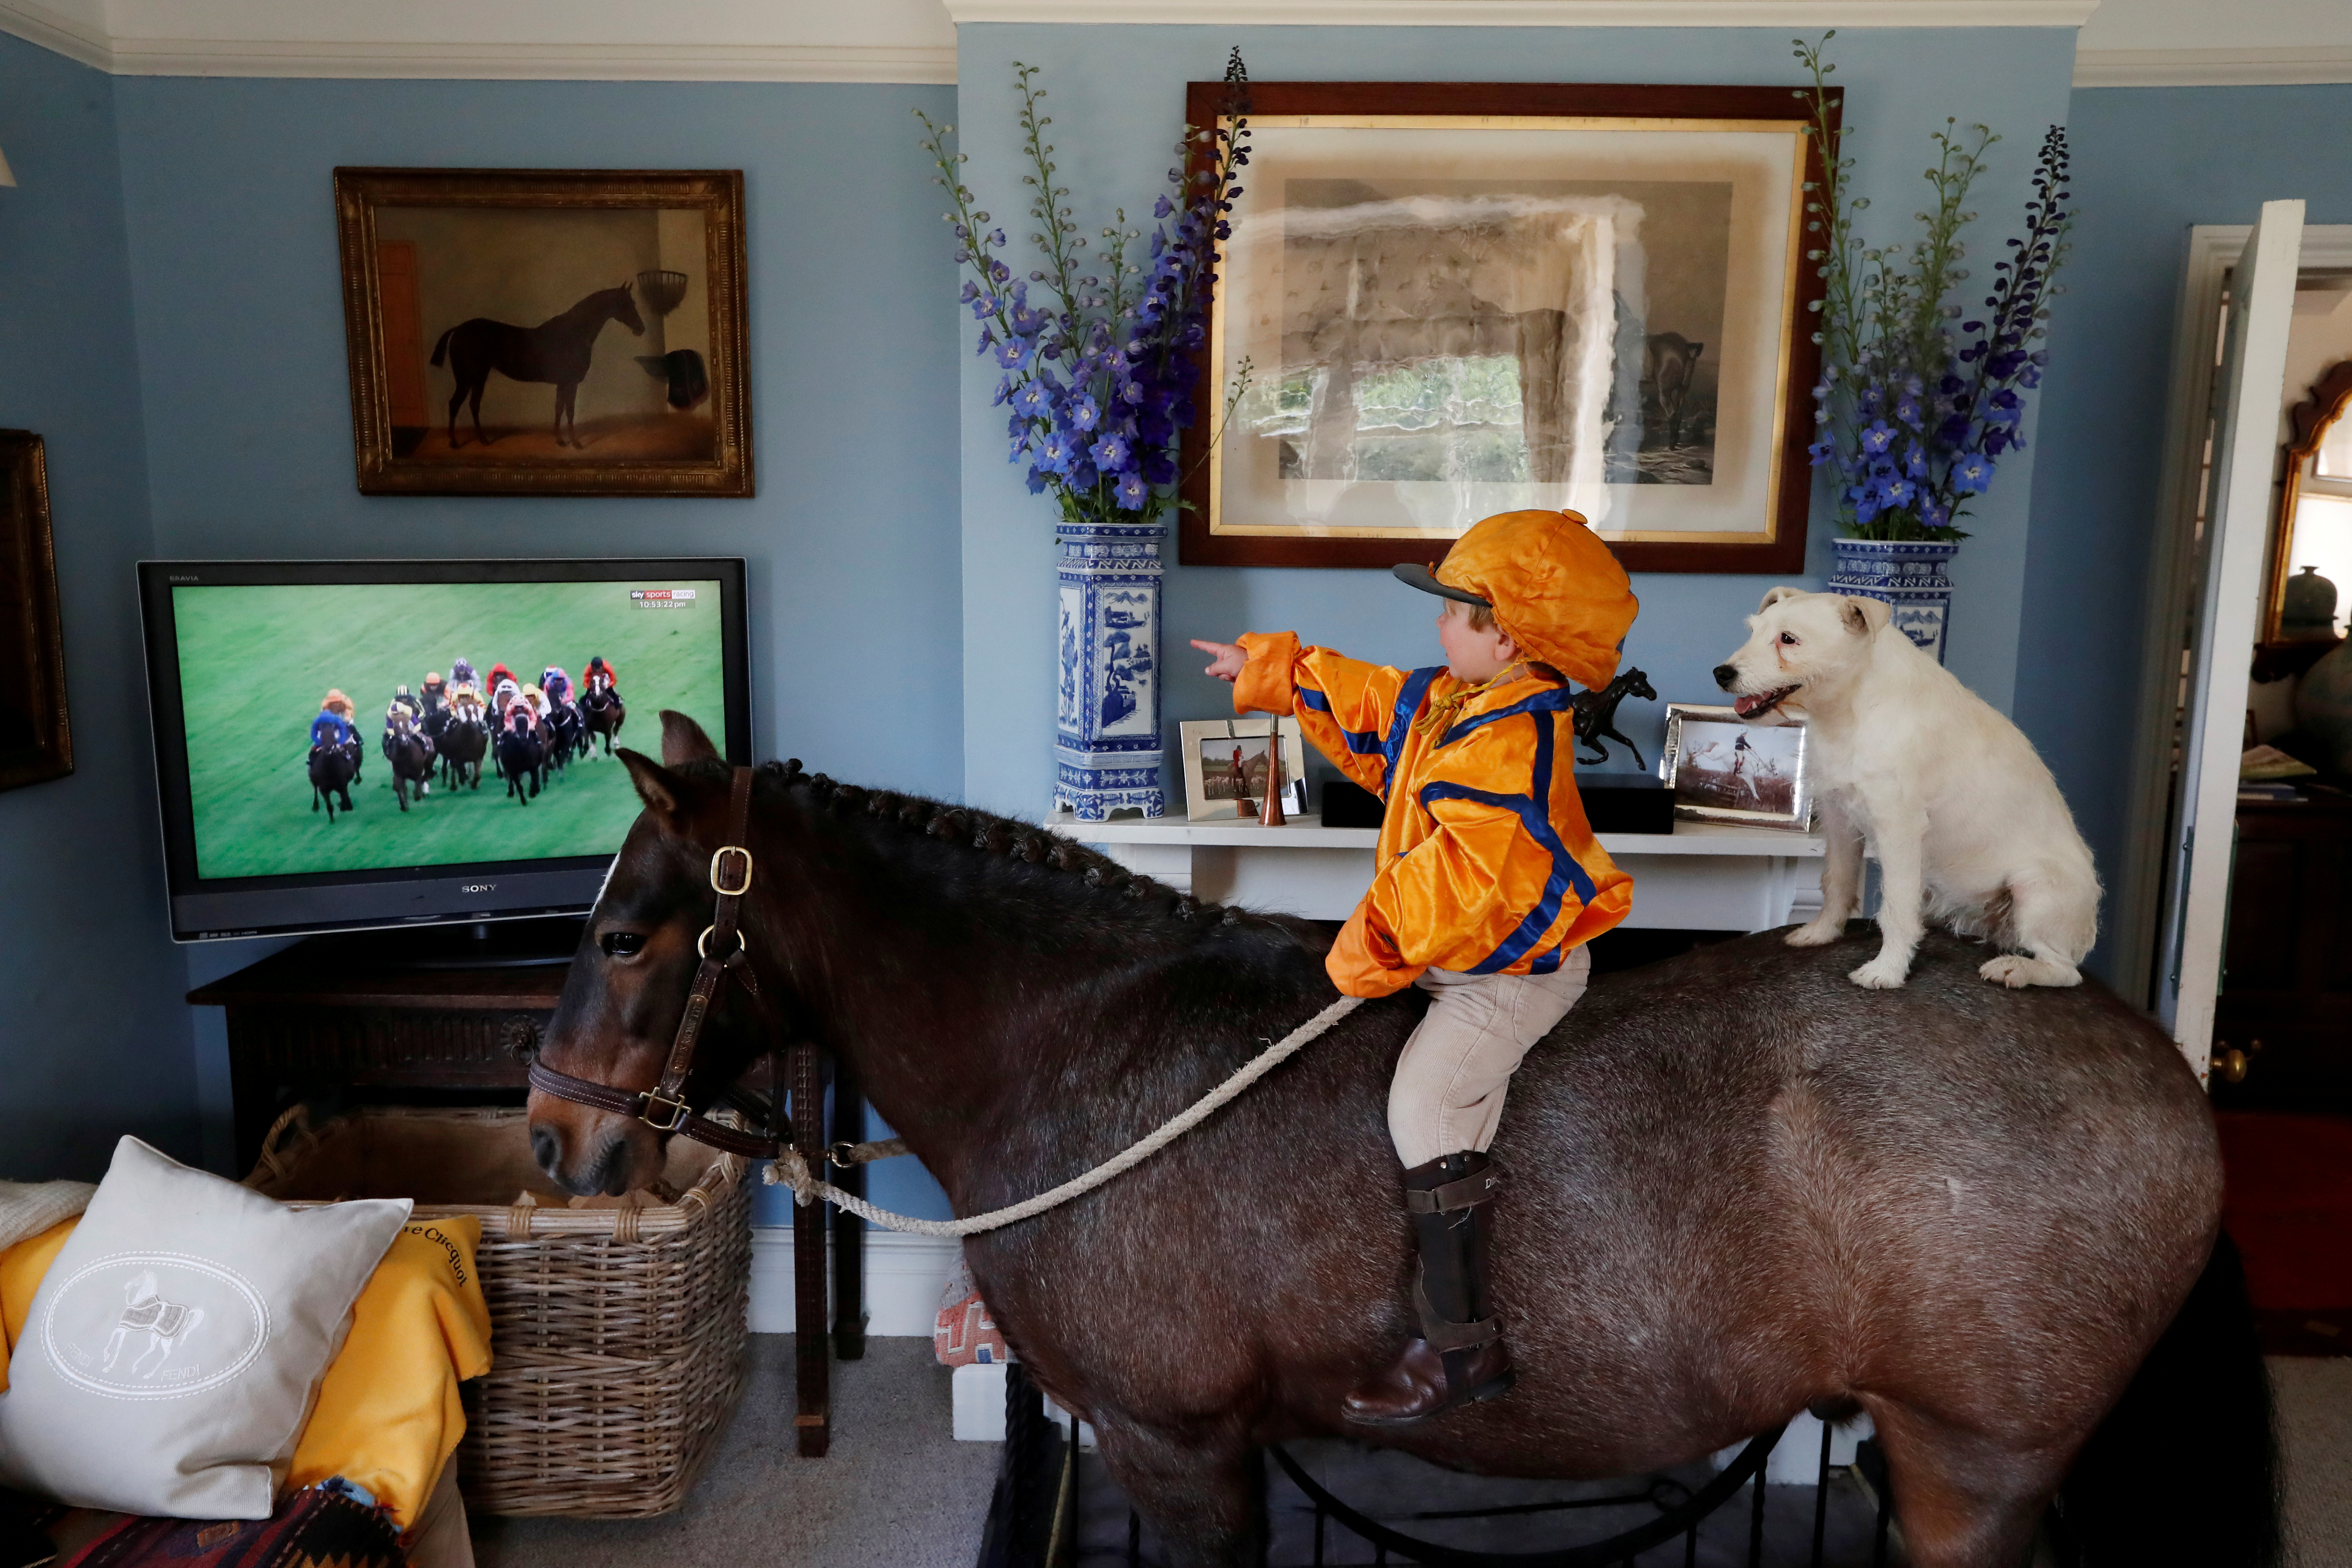 A boy watches TV on his horse.